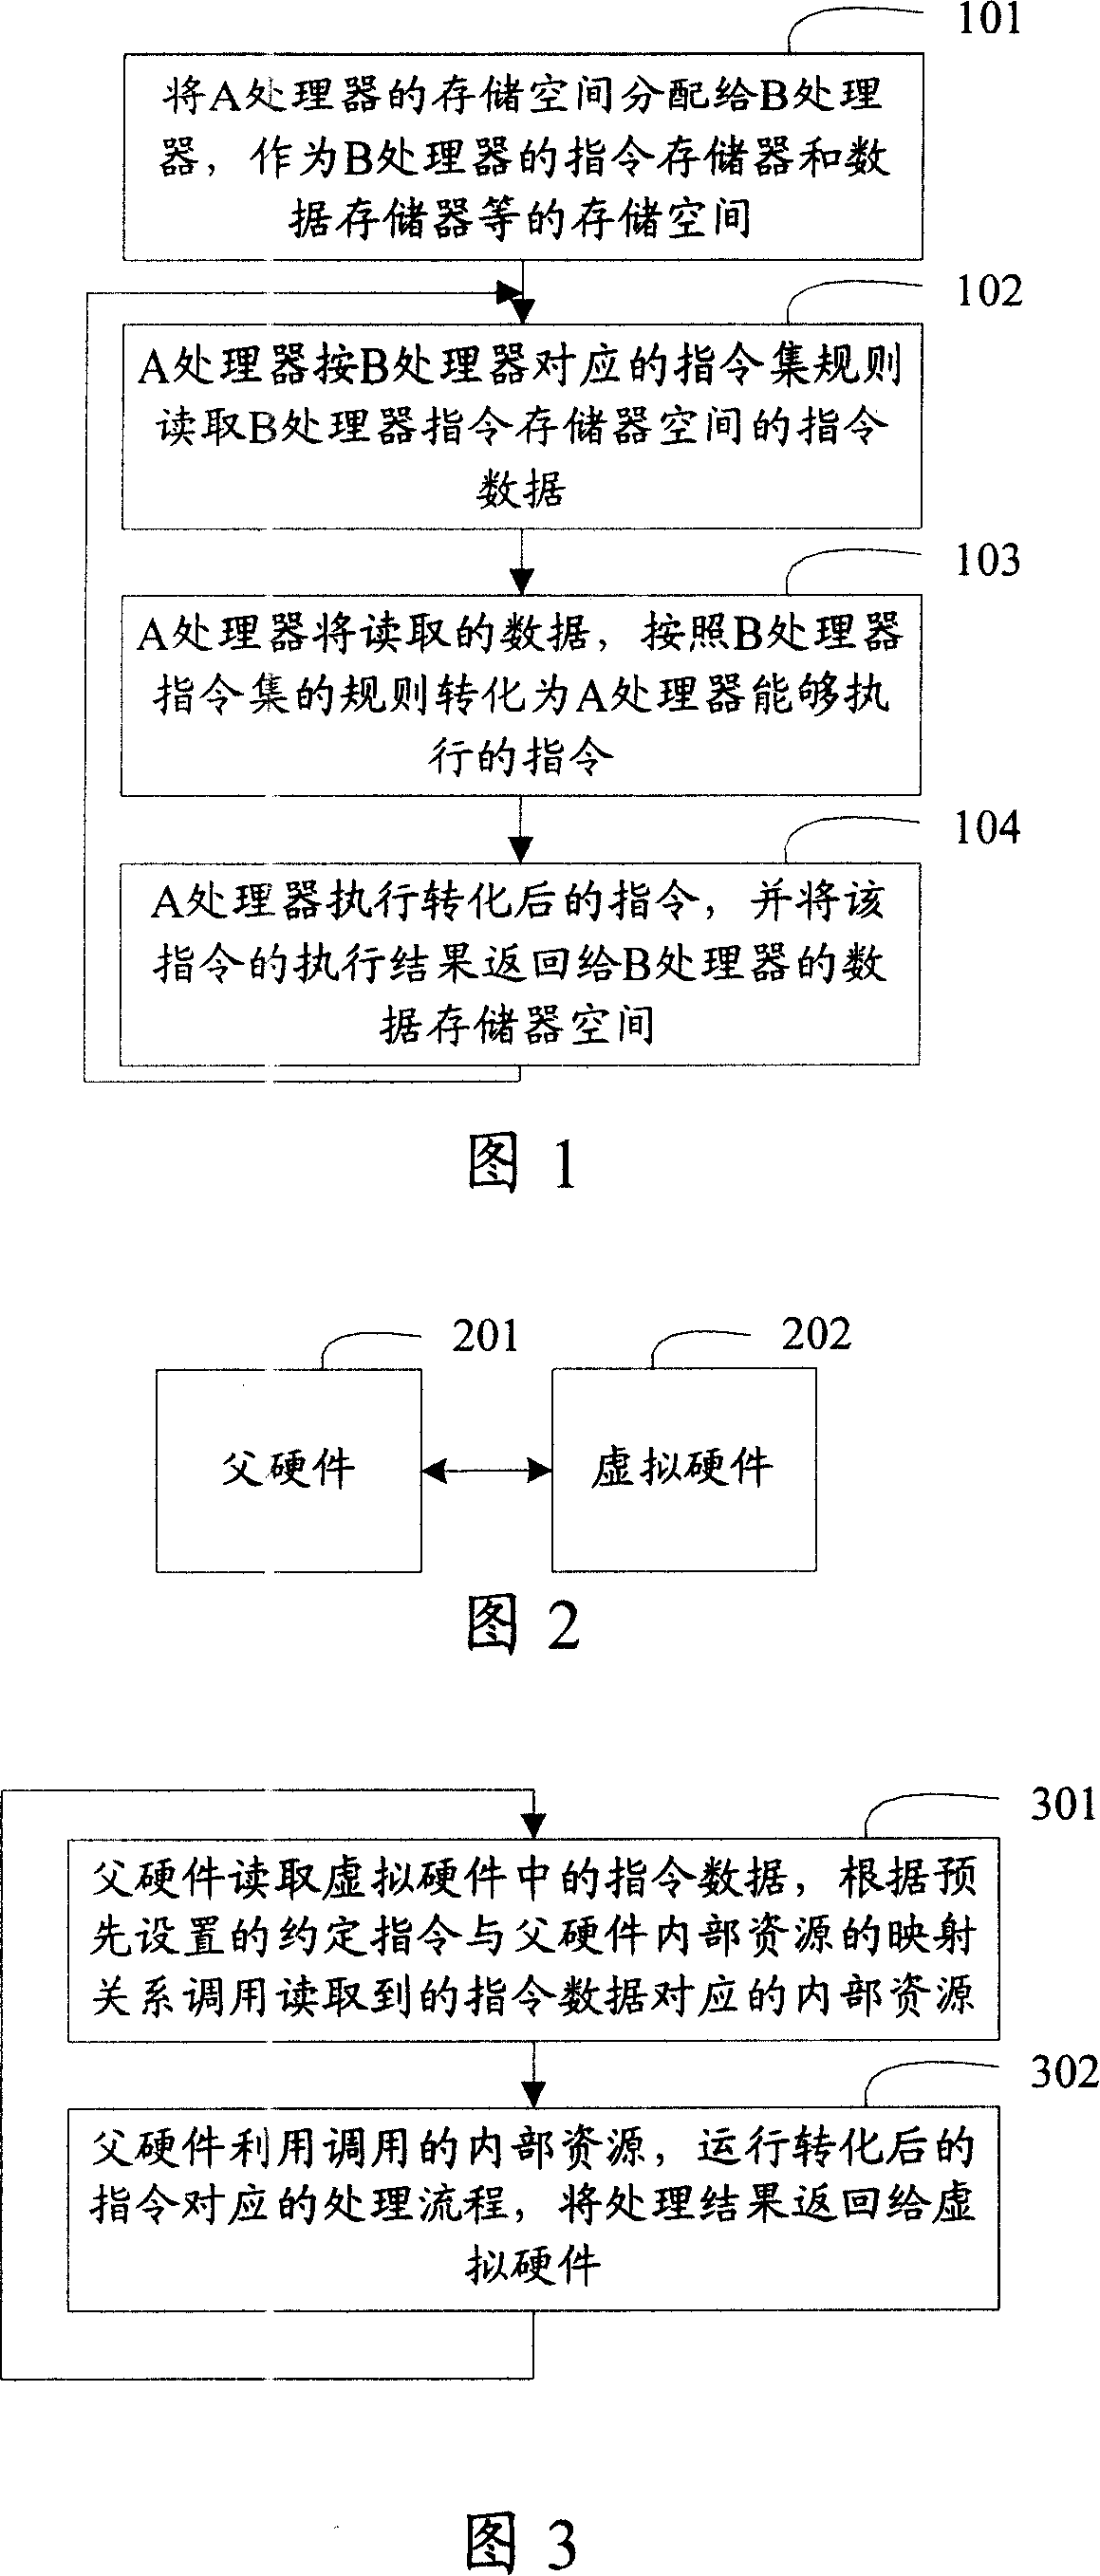 Virtual hardware system and instruction executing method based on virtual hardware system